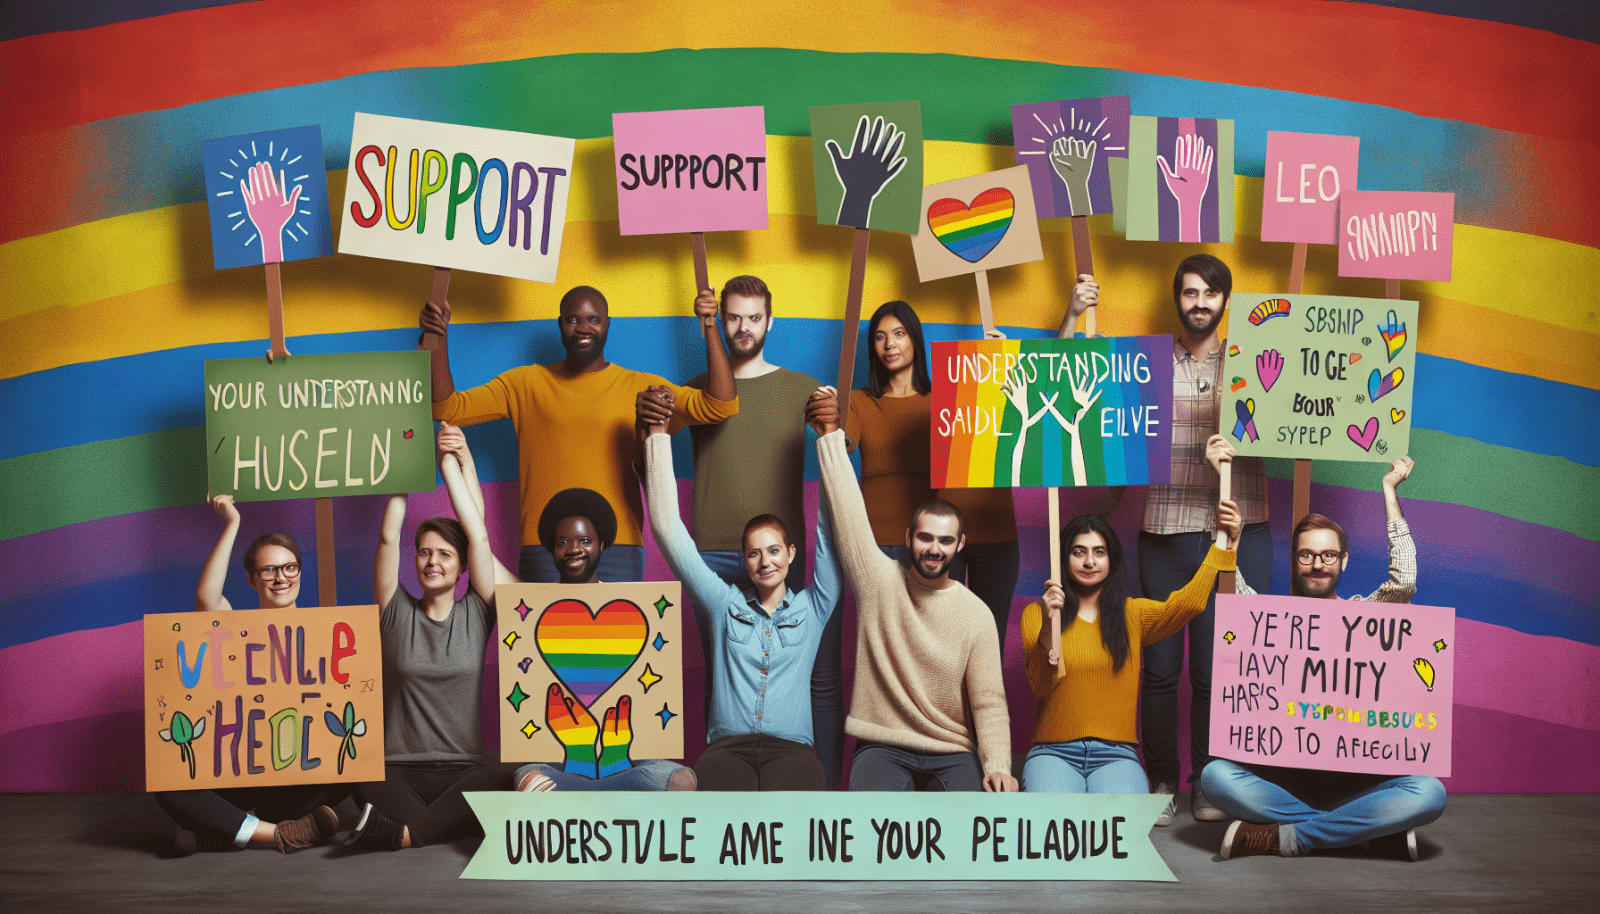 A diverse group of people is sitting and standing against a colorful rainbow-striped background, holding placards with various positive messages and symbols about support, love, and understanding. Some signs feature heart symbols and hand illustrations, while others display phrases and words such as "SUPPORT" and "UNDERSTANDING."